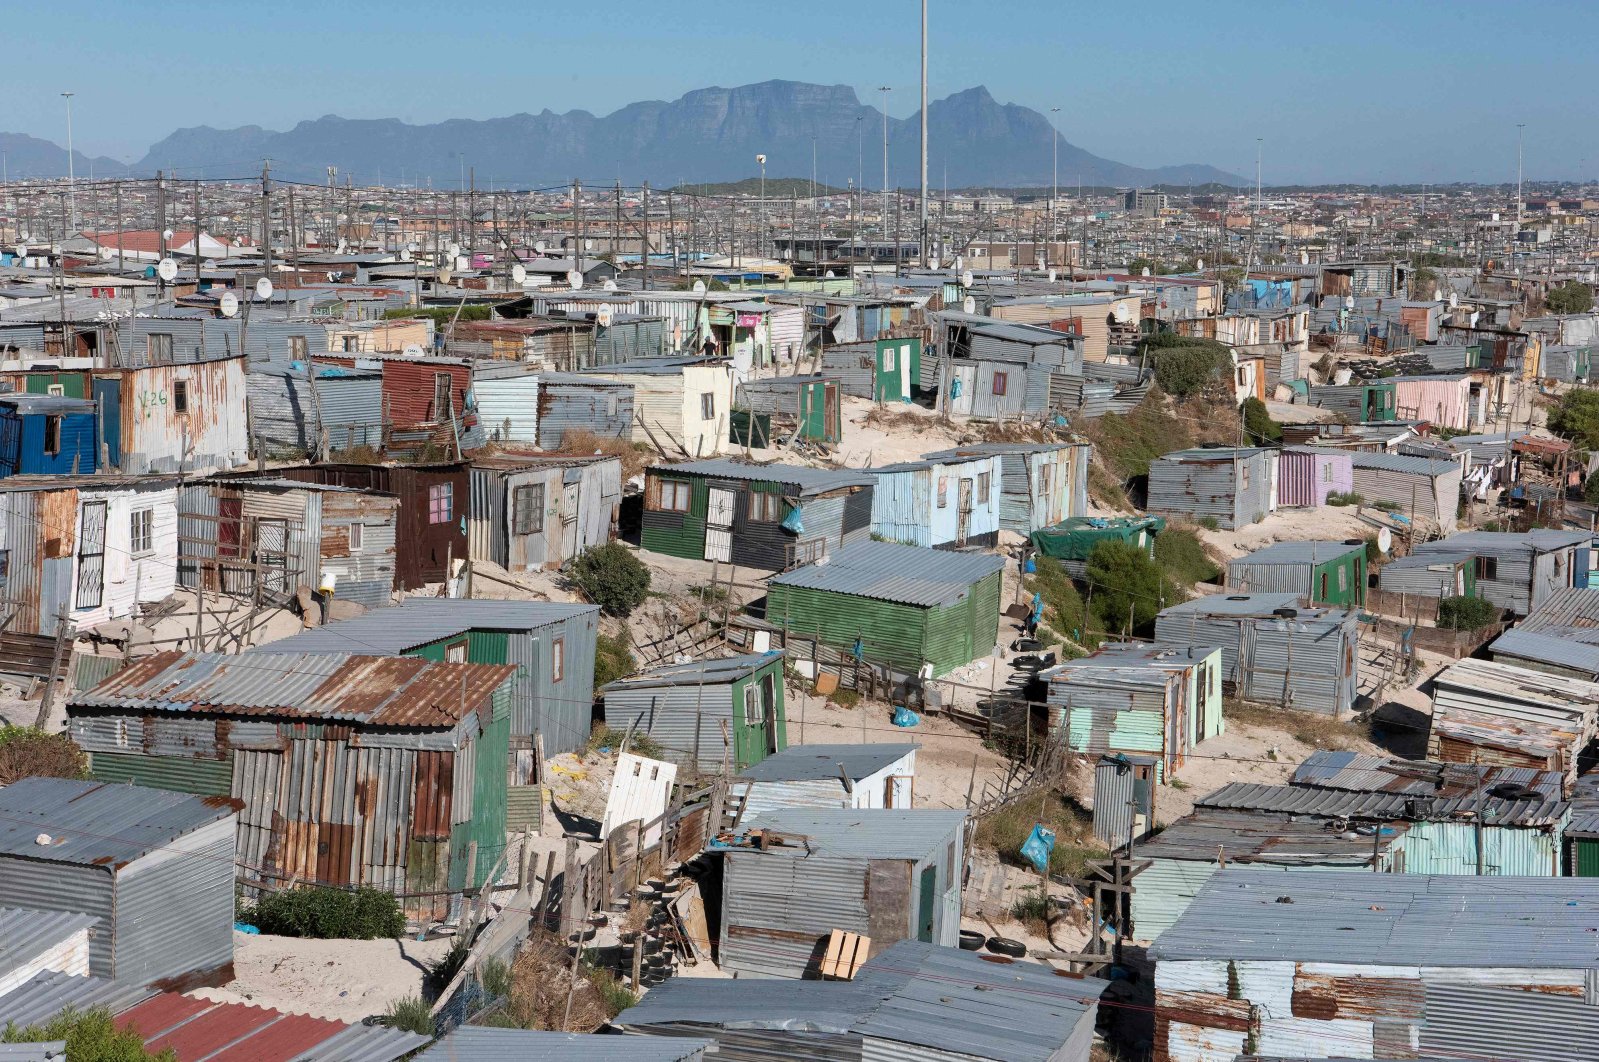 A general view of informal settlements and other parts of Khayelitsha, home to millions of people in mostly impoverished circumstances, with the back of Table Mountain visible, near Cape Town, South Africa, Feb. 24, 2022. (AFP Photo) 